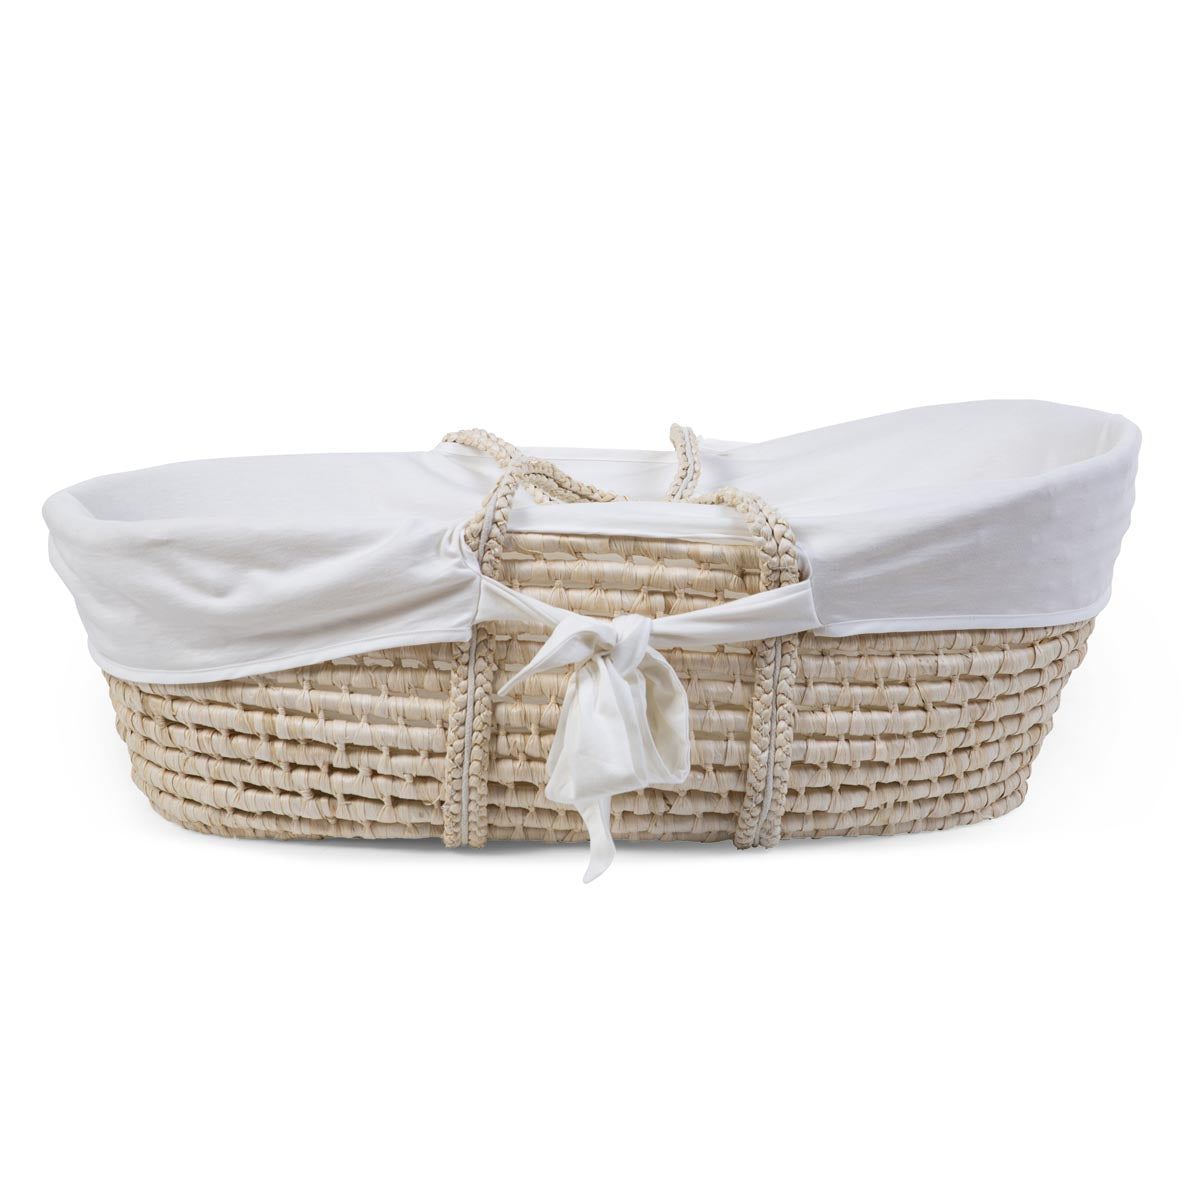 Childhome Jersey Cotton Insert for Moses Baskets